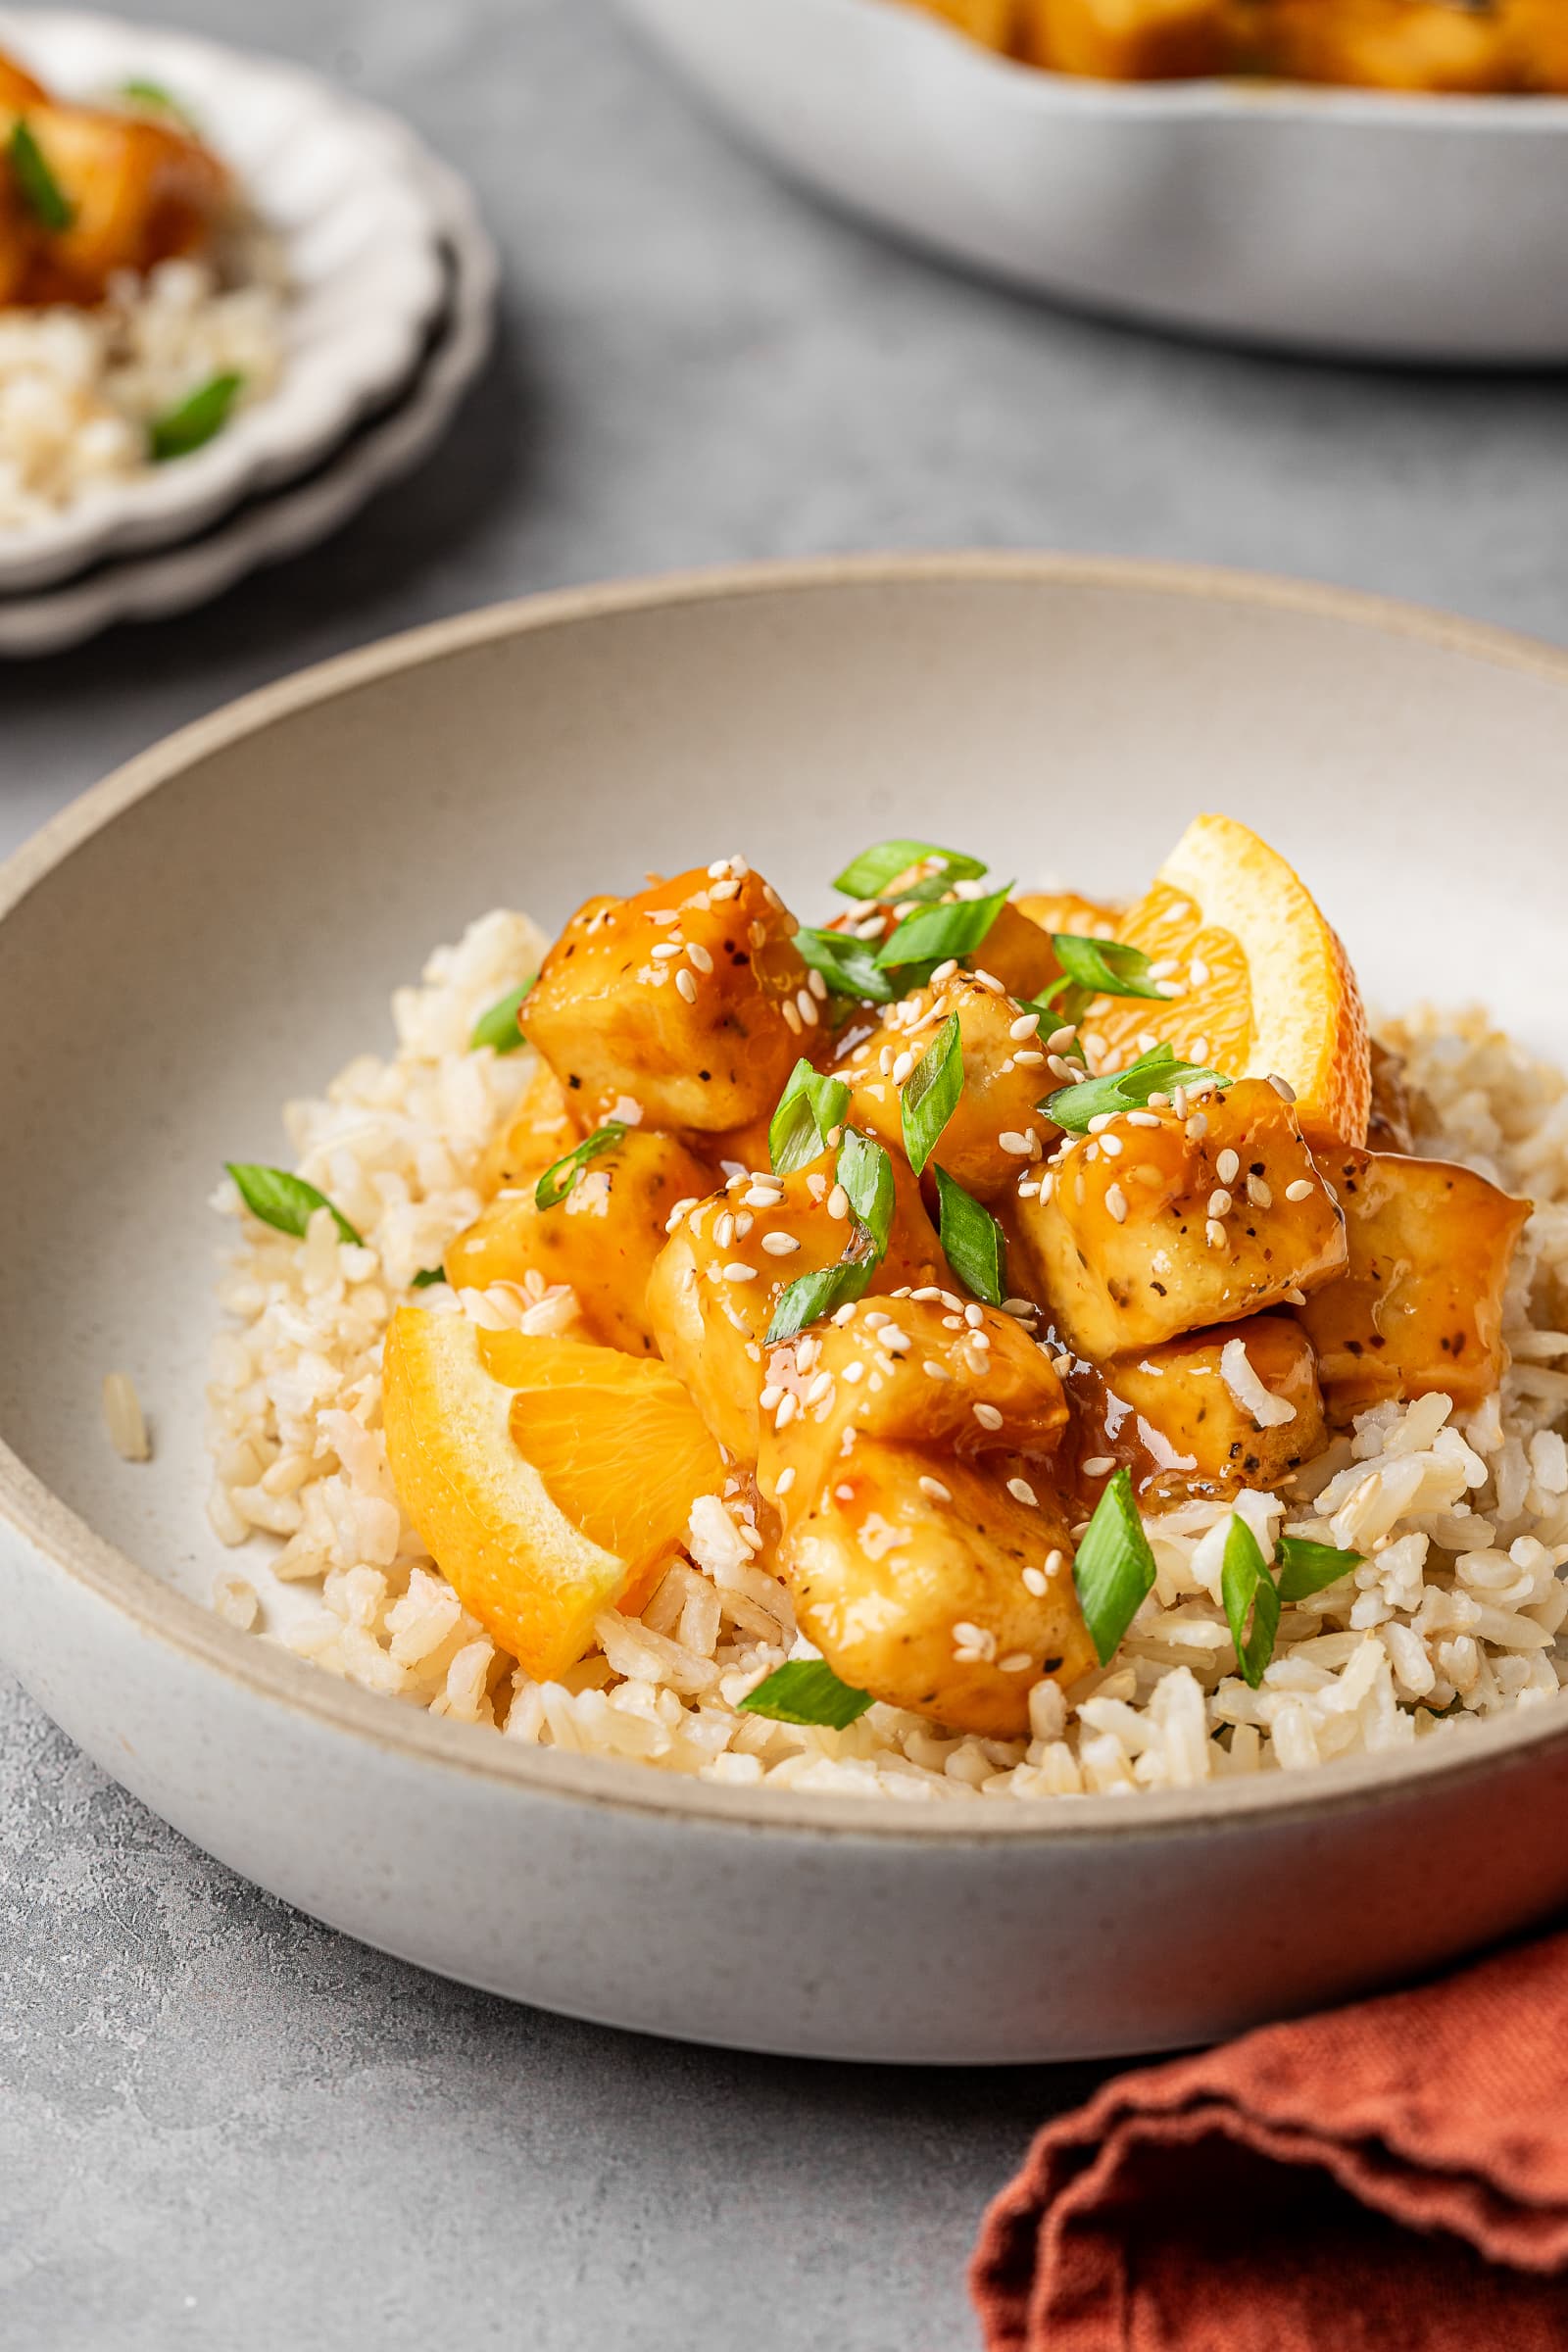 Orange tofu served over brown rice and garnished with sesame seeds and green onions.